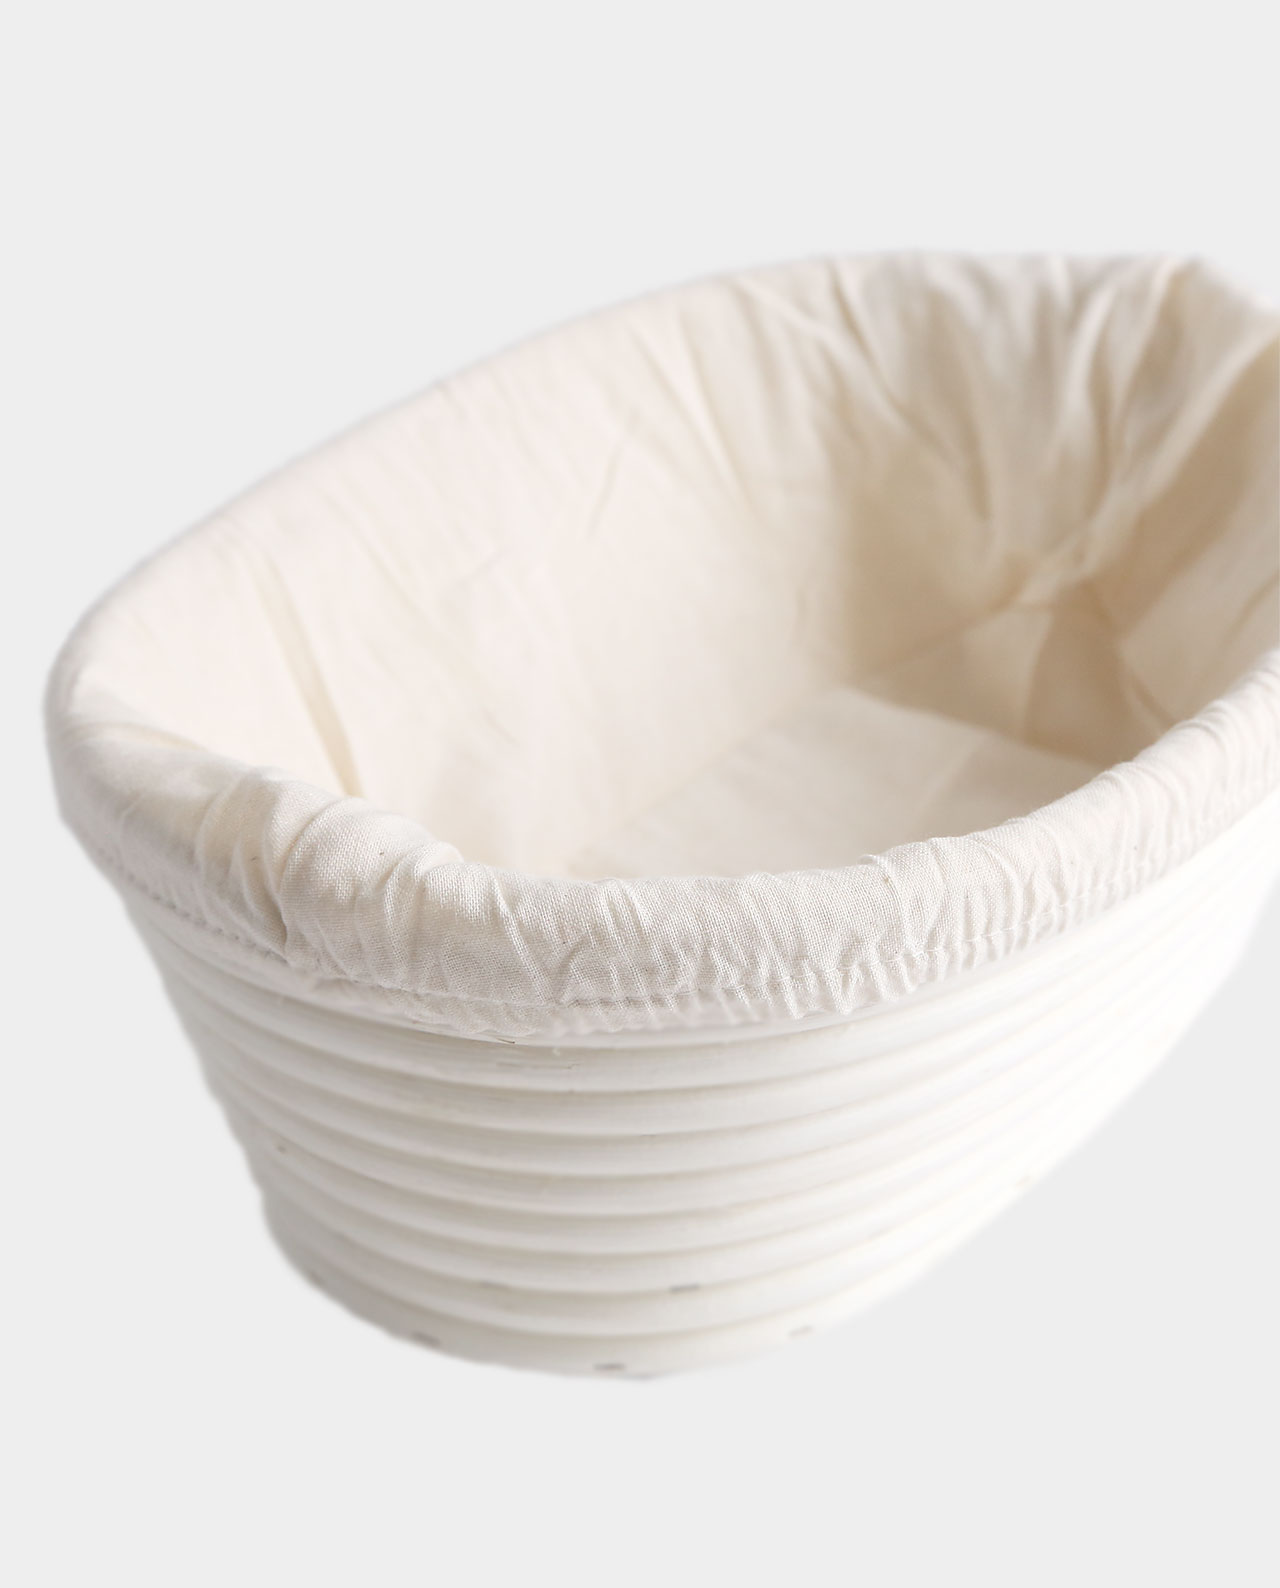 Small Oval Proofing Basket Liner